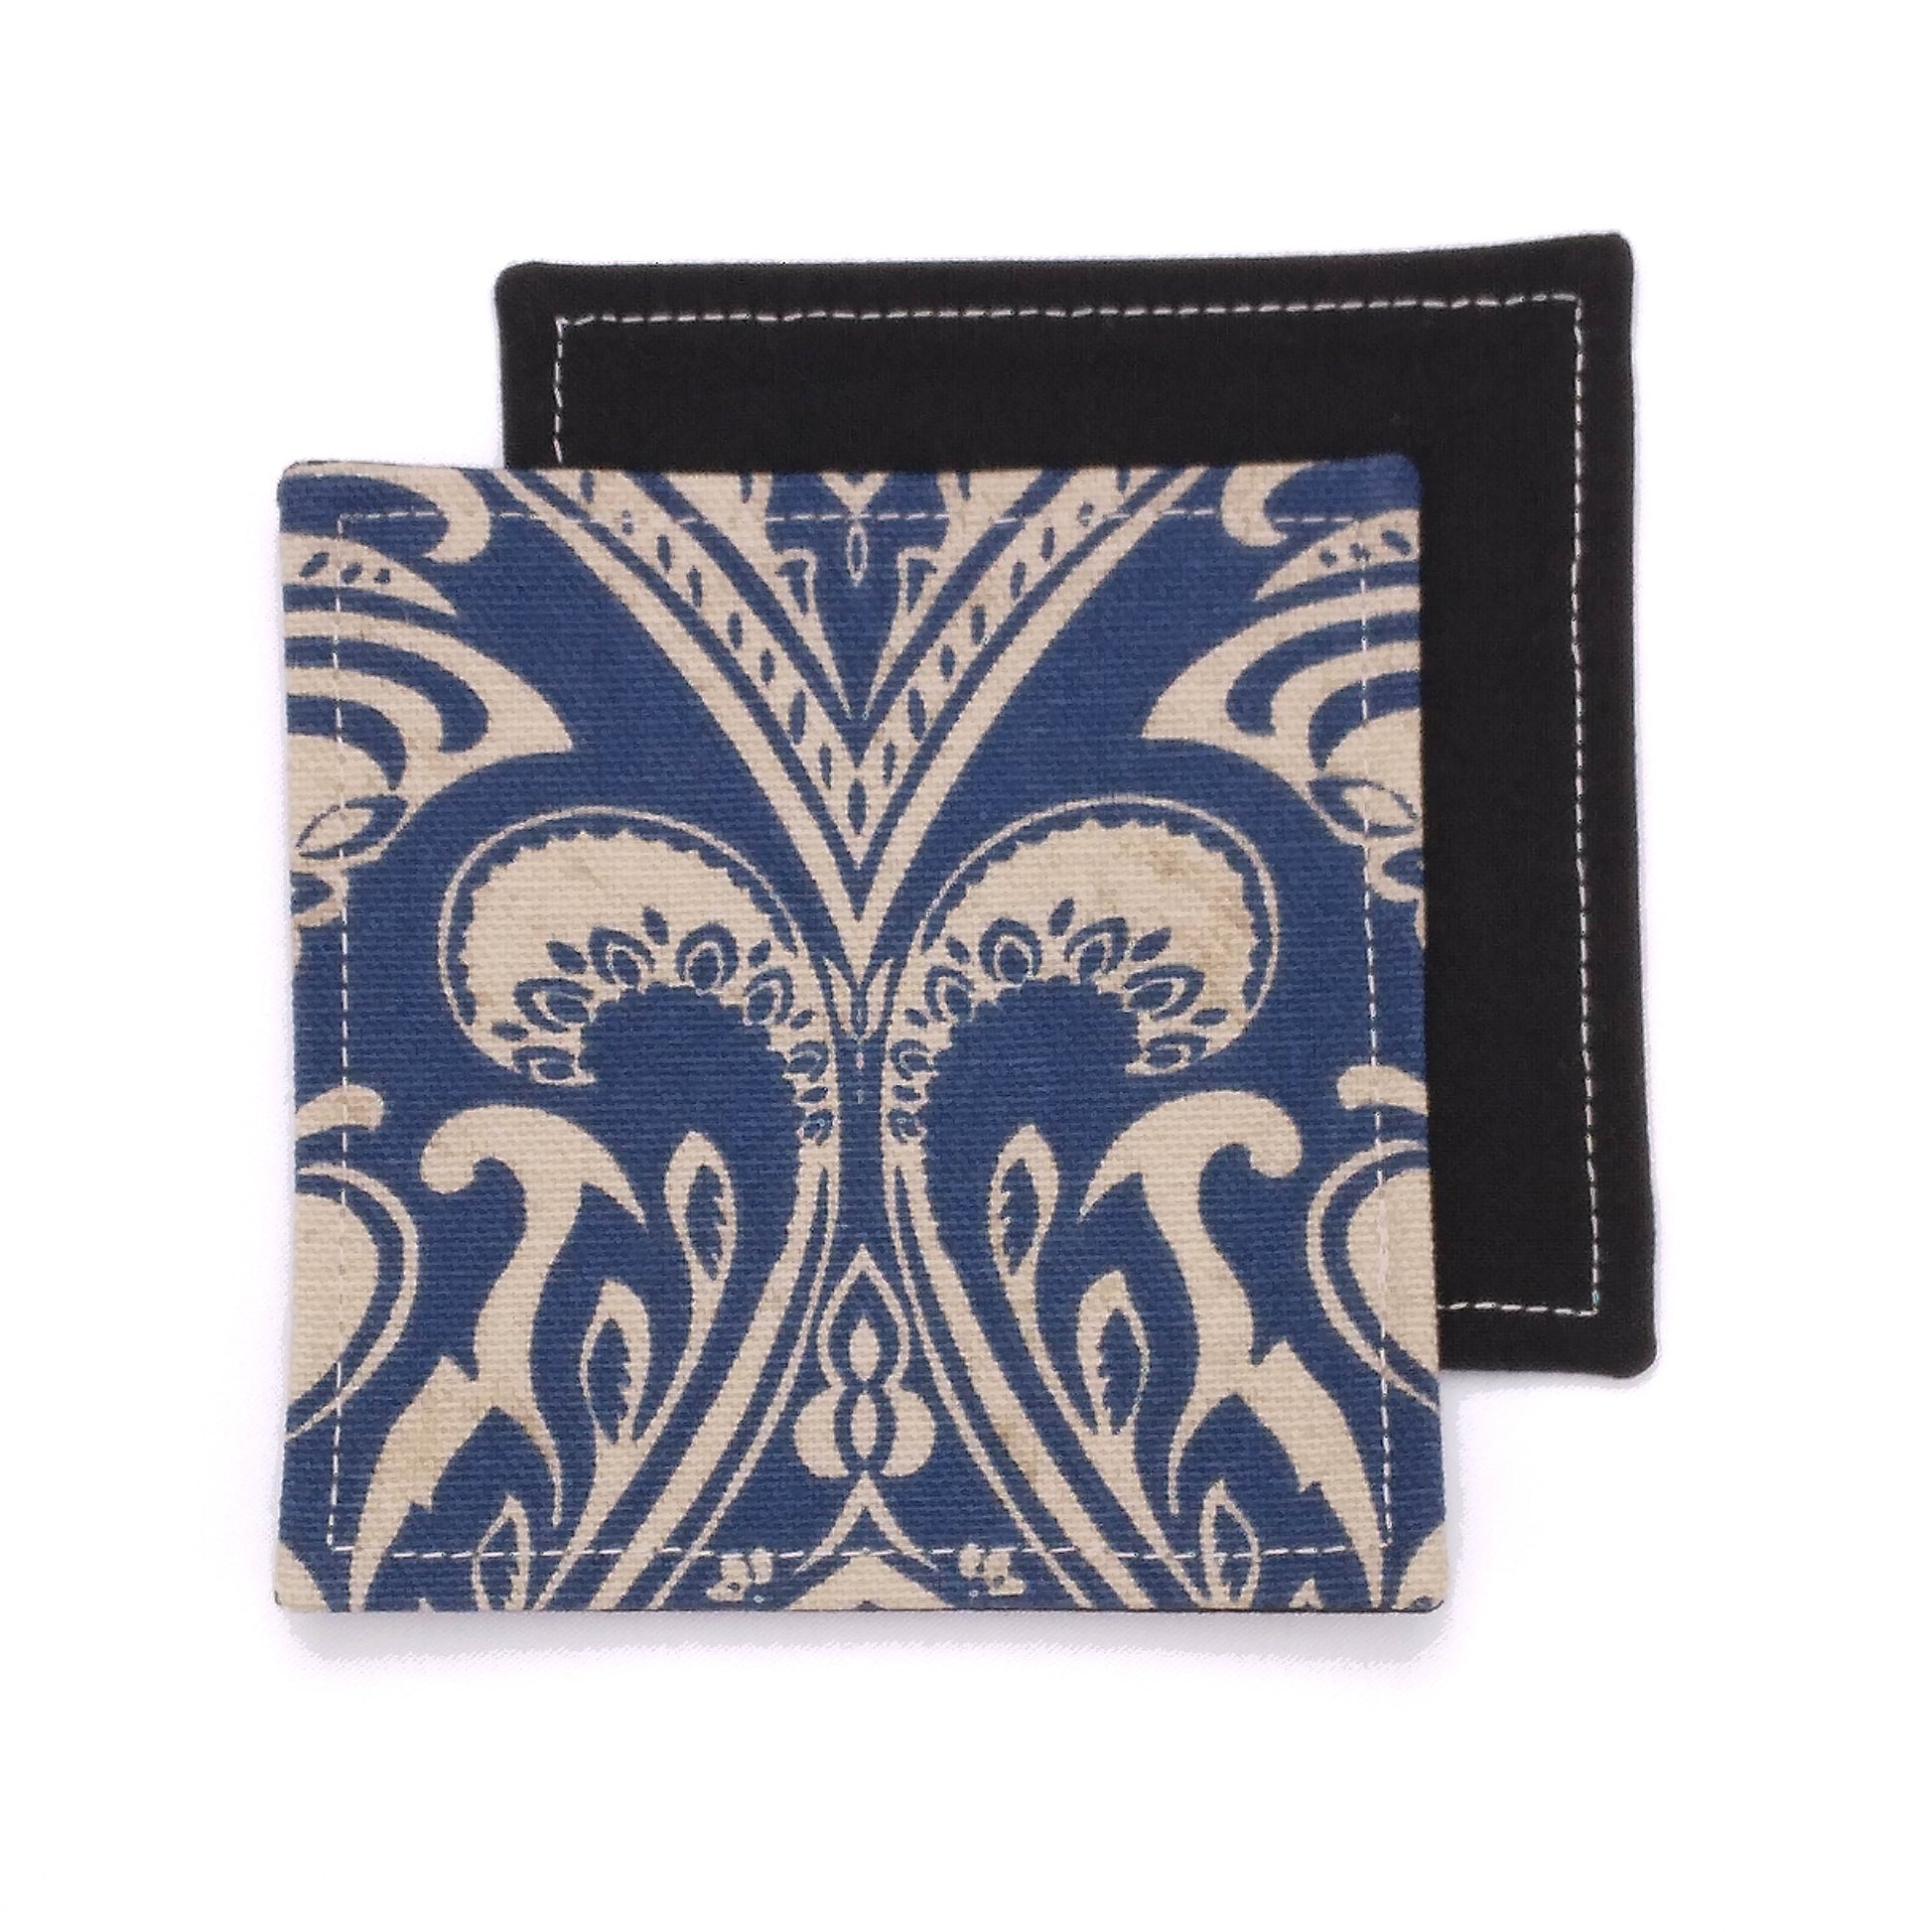 Square coasters with tan damask print on blue background